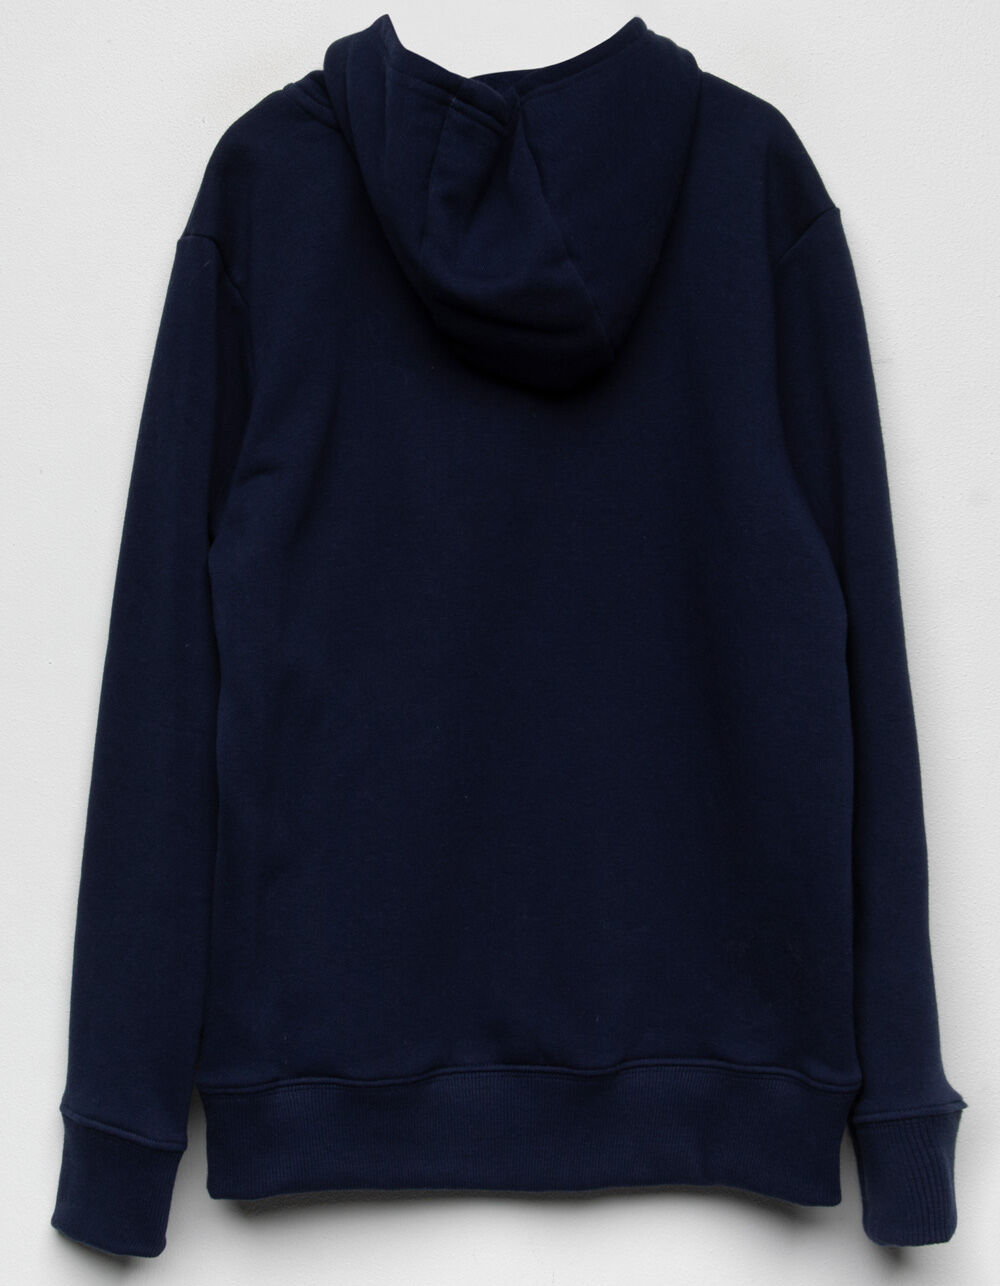 THE NORTH FACE Dome Logowear Girls Hoodie - NAVY | Tillys